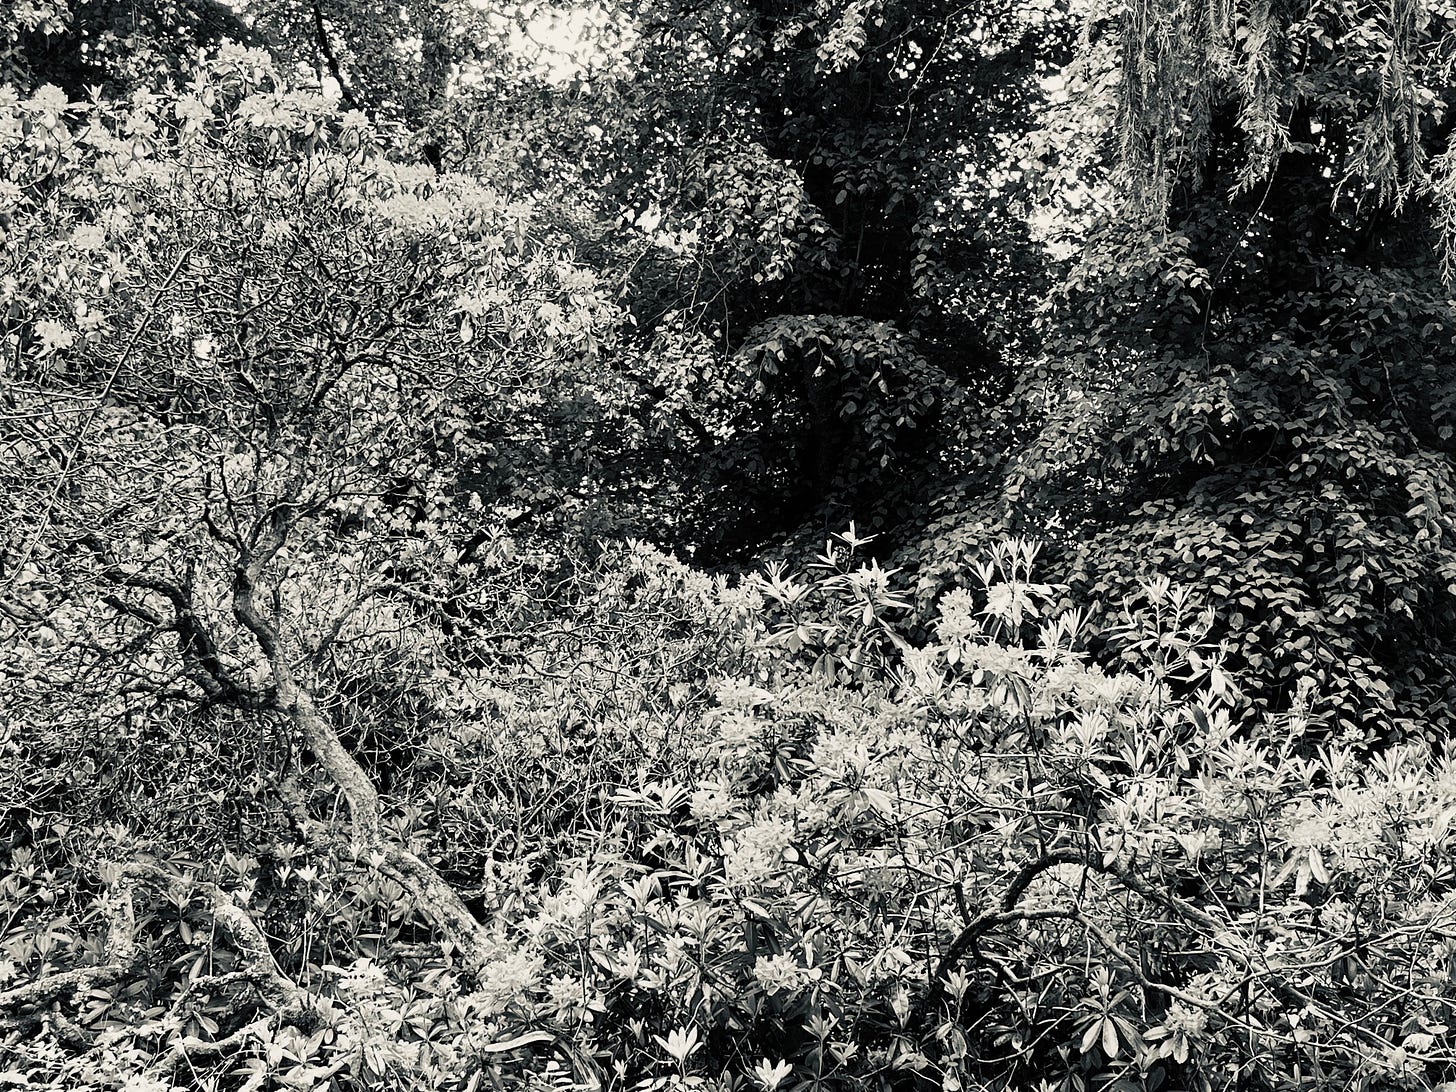 A monochrome view of old rhododendrons on an Aberdeenshire estate is reminiscent of a detailed engraving in black and white